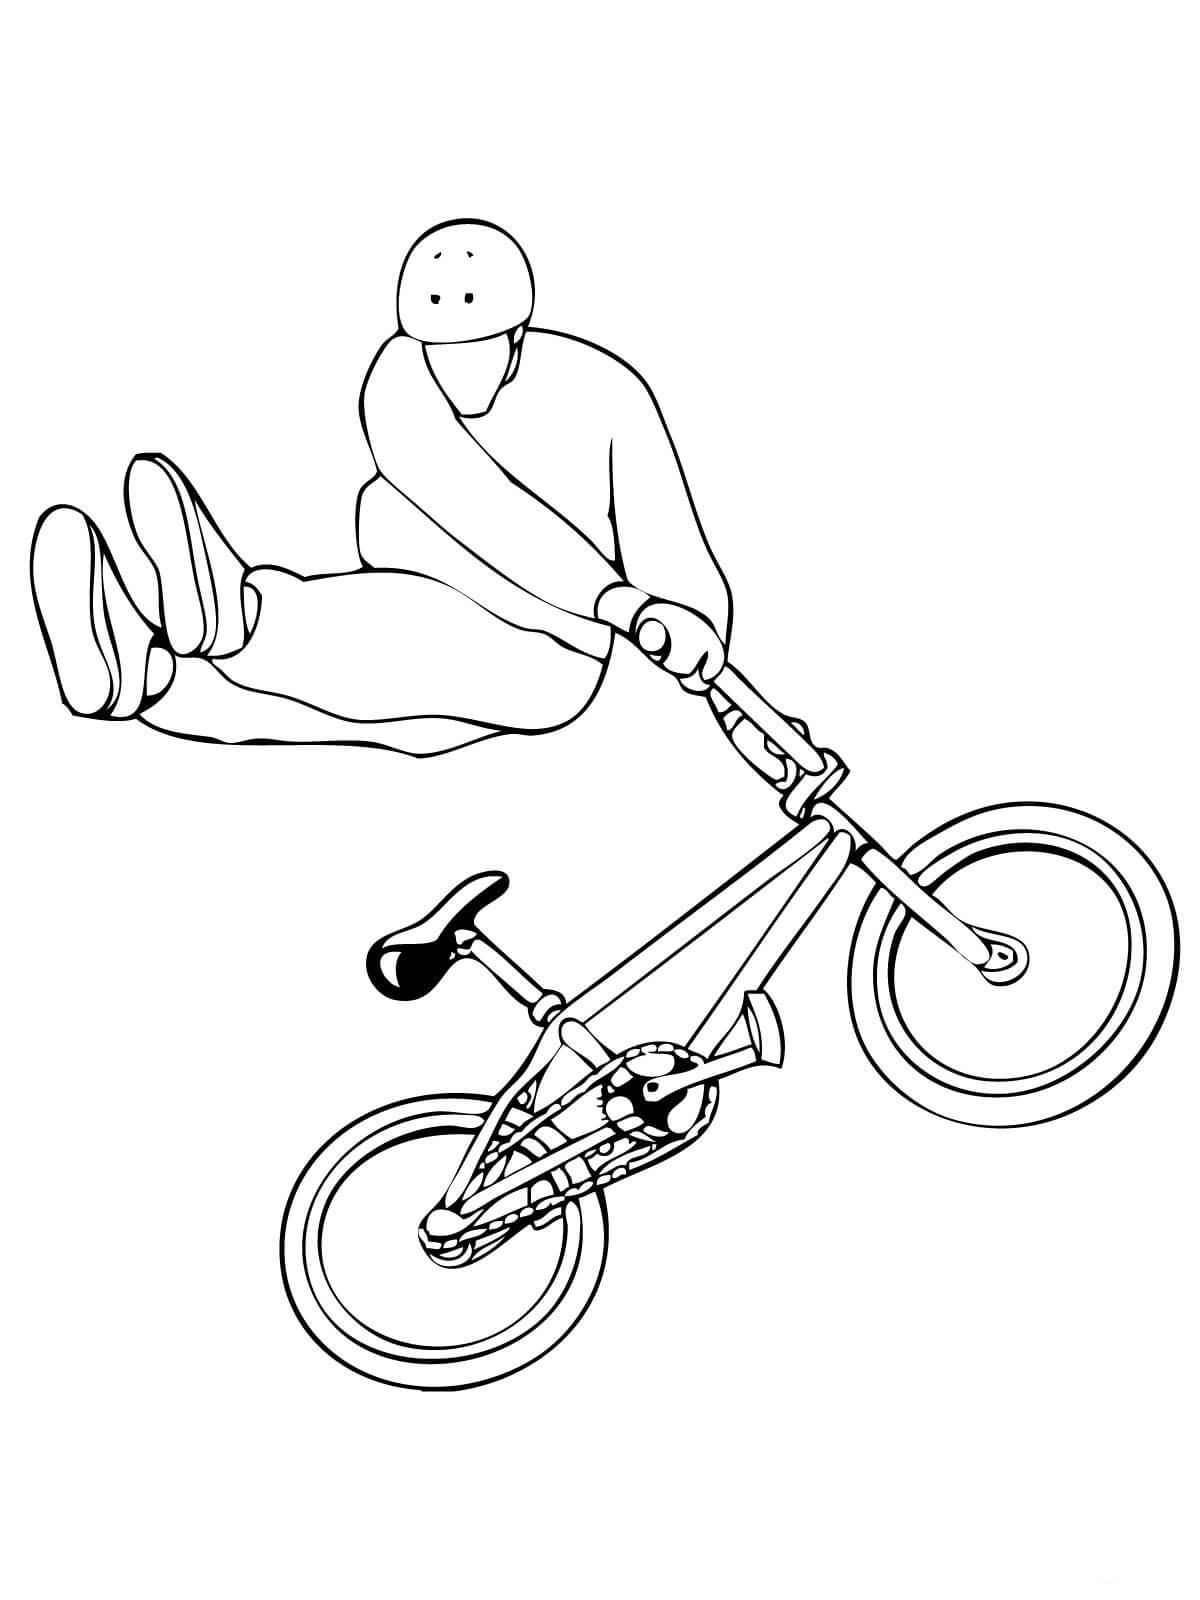 Tail Whip Bmx Bicycle